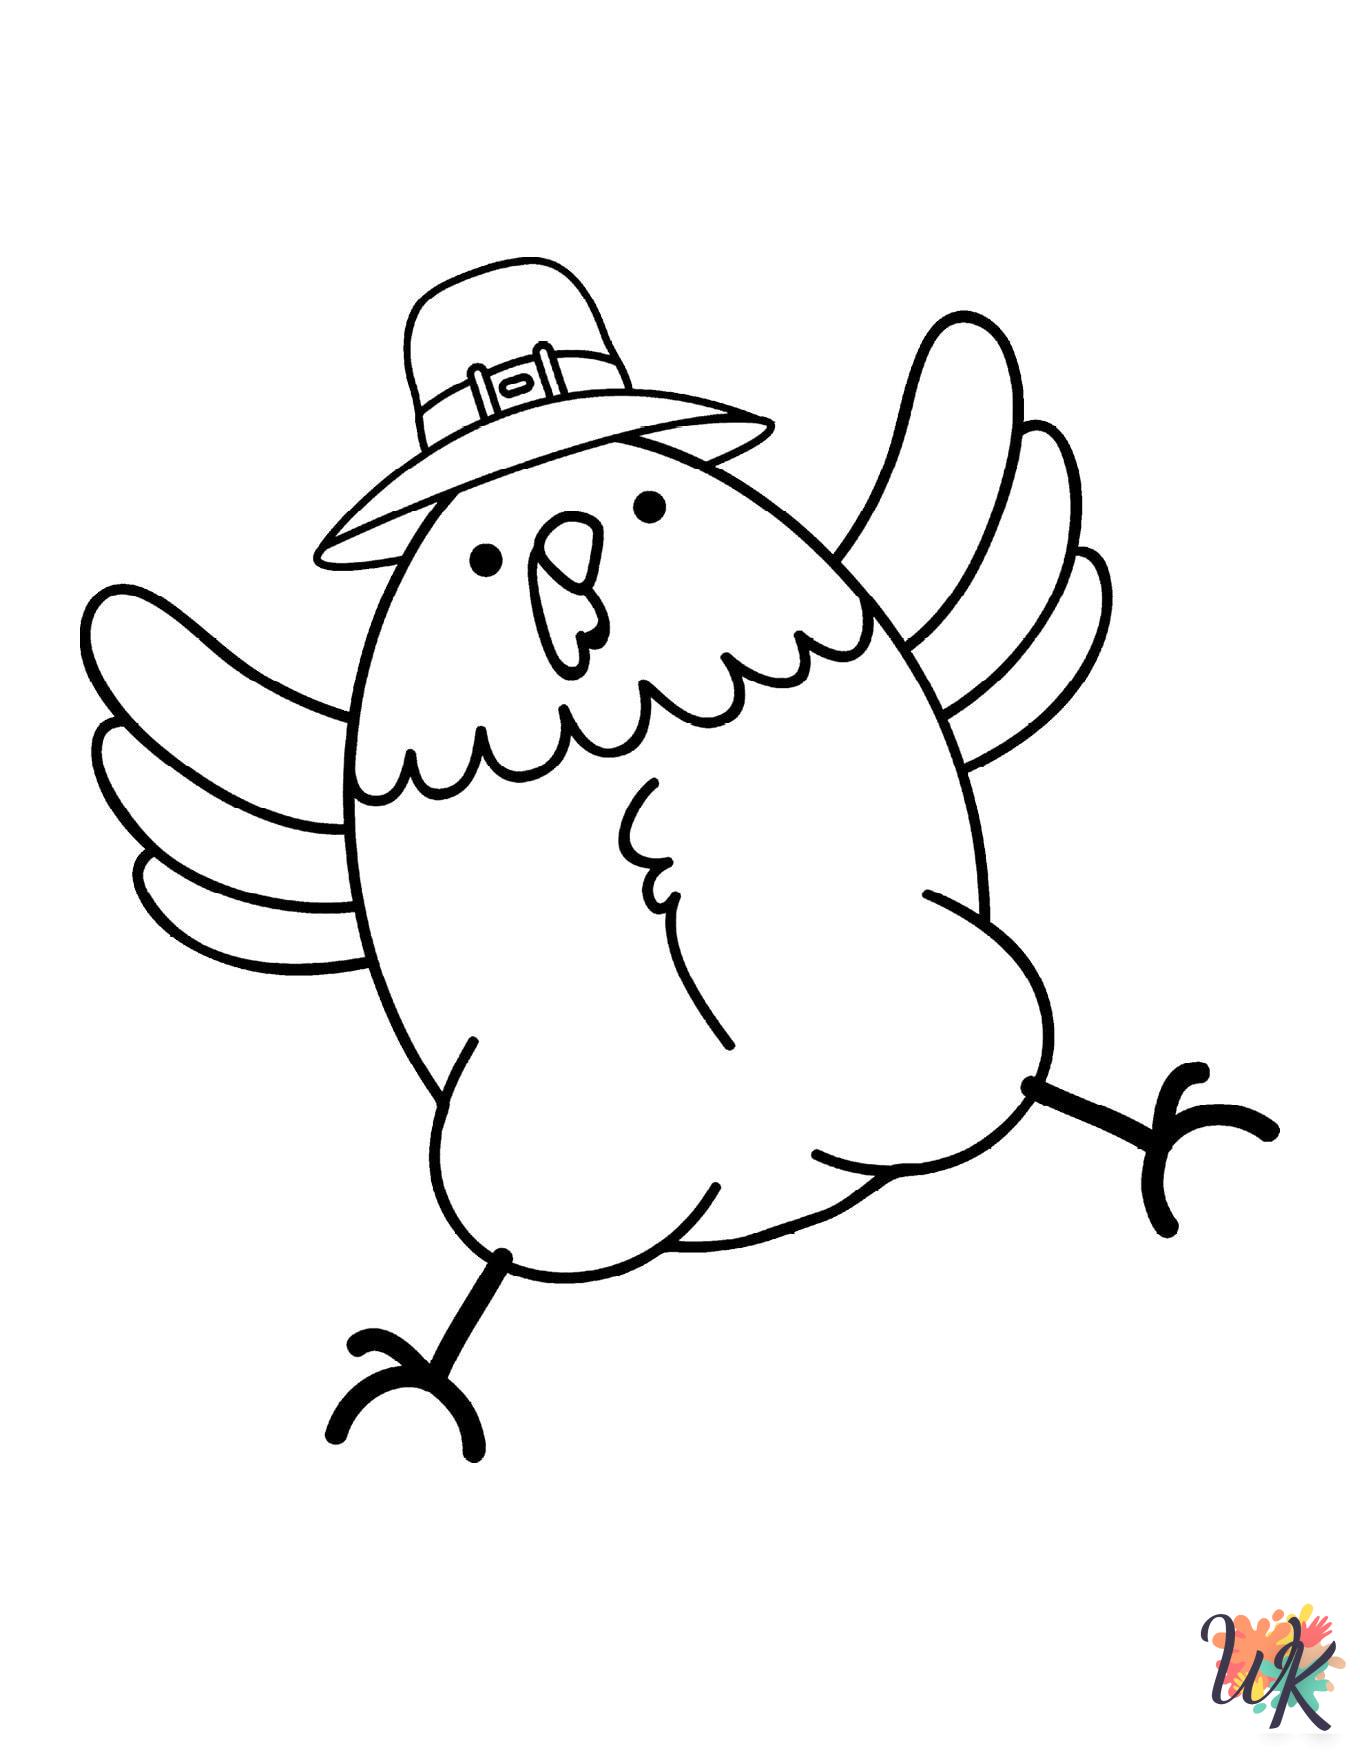 Turkey coloring pages grinch